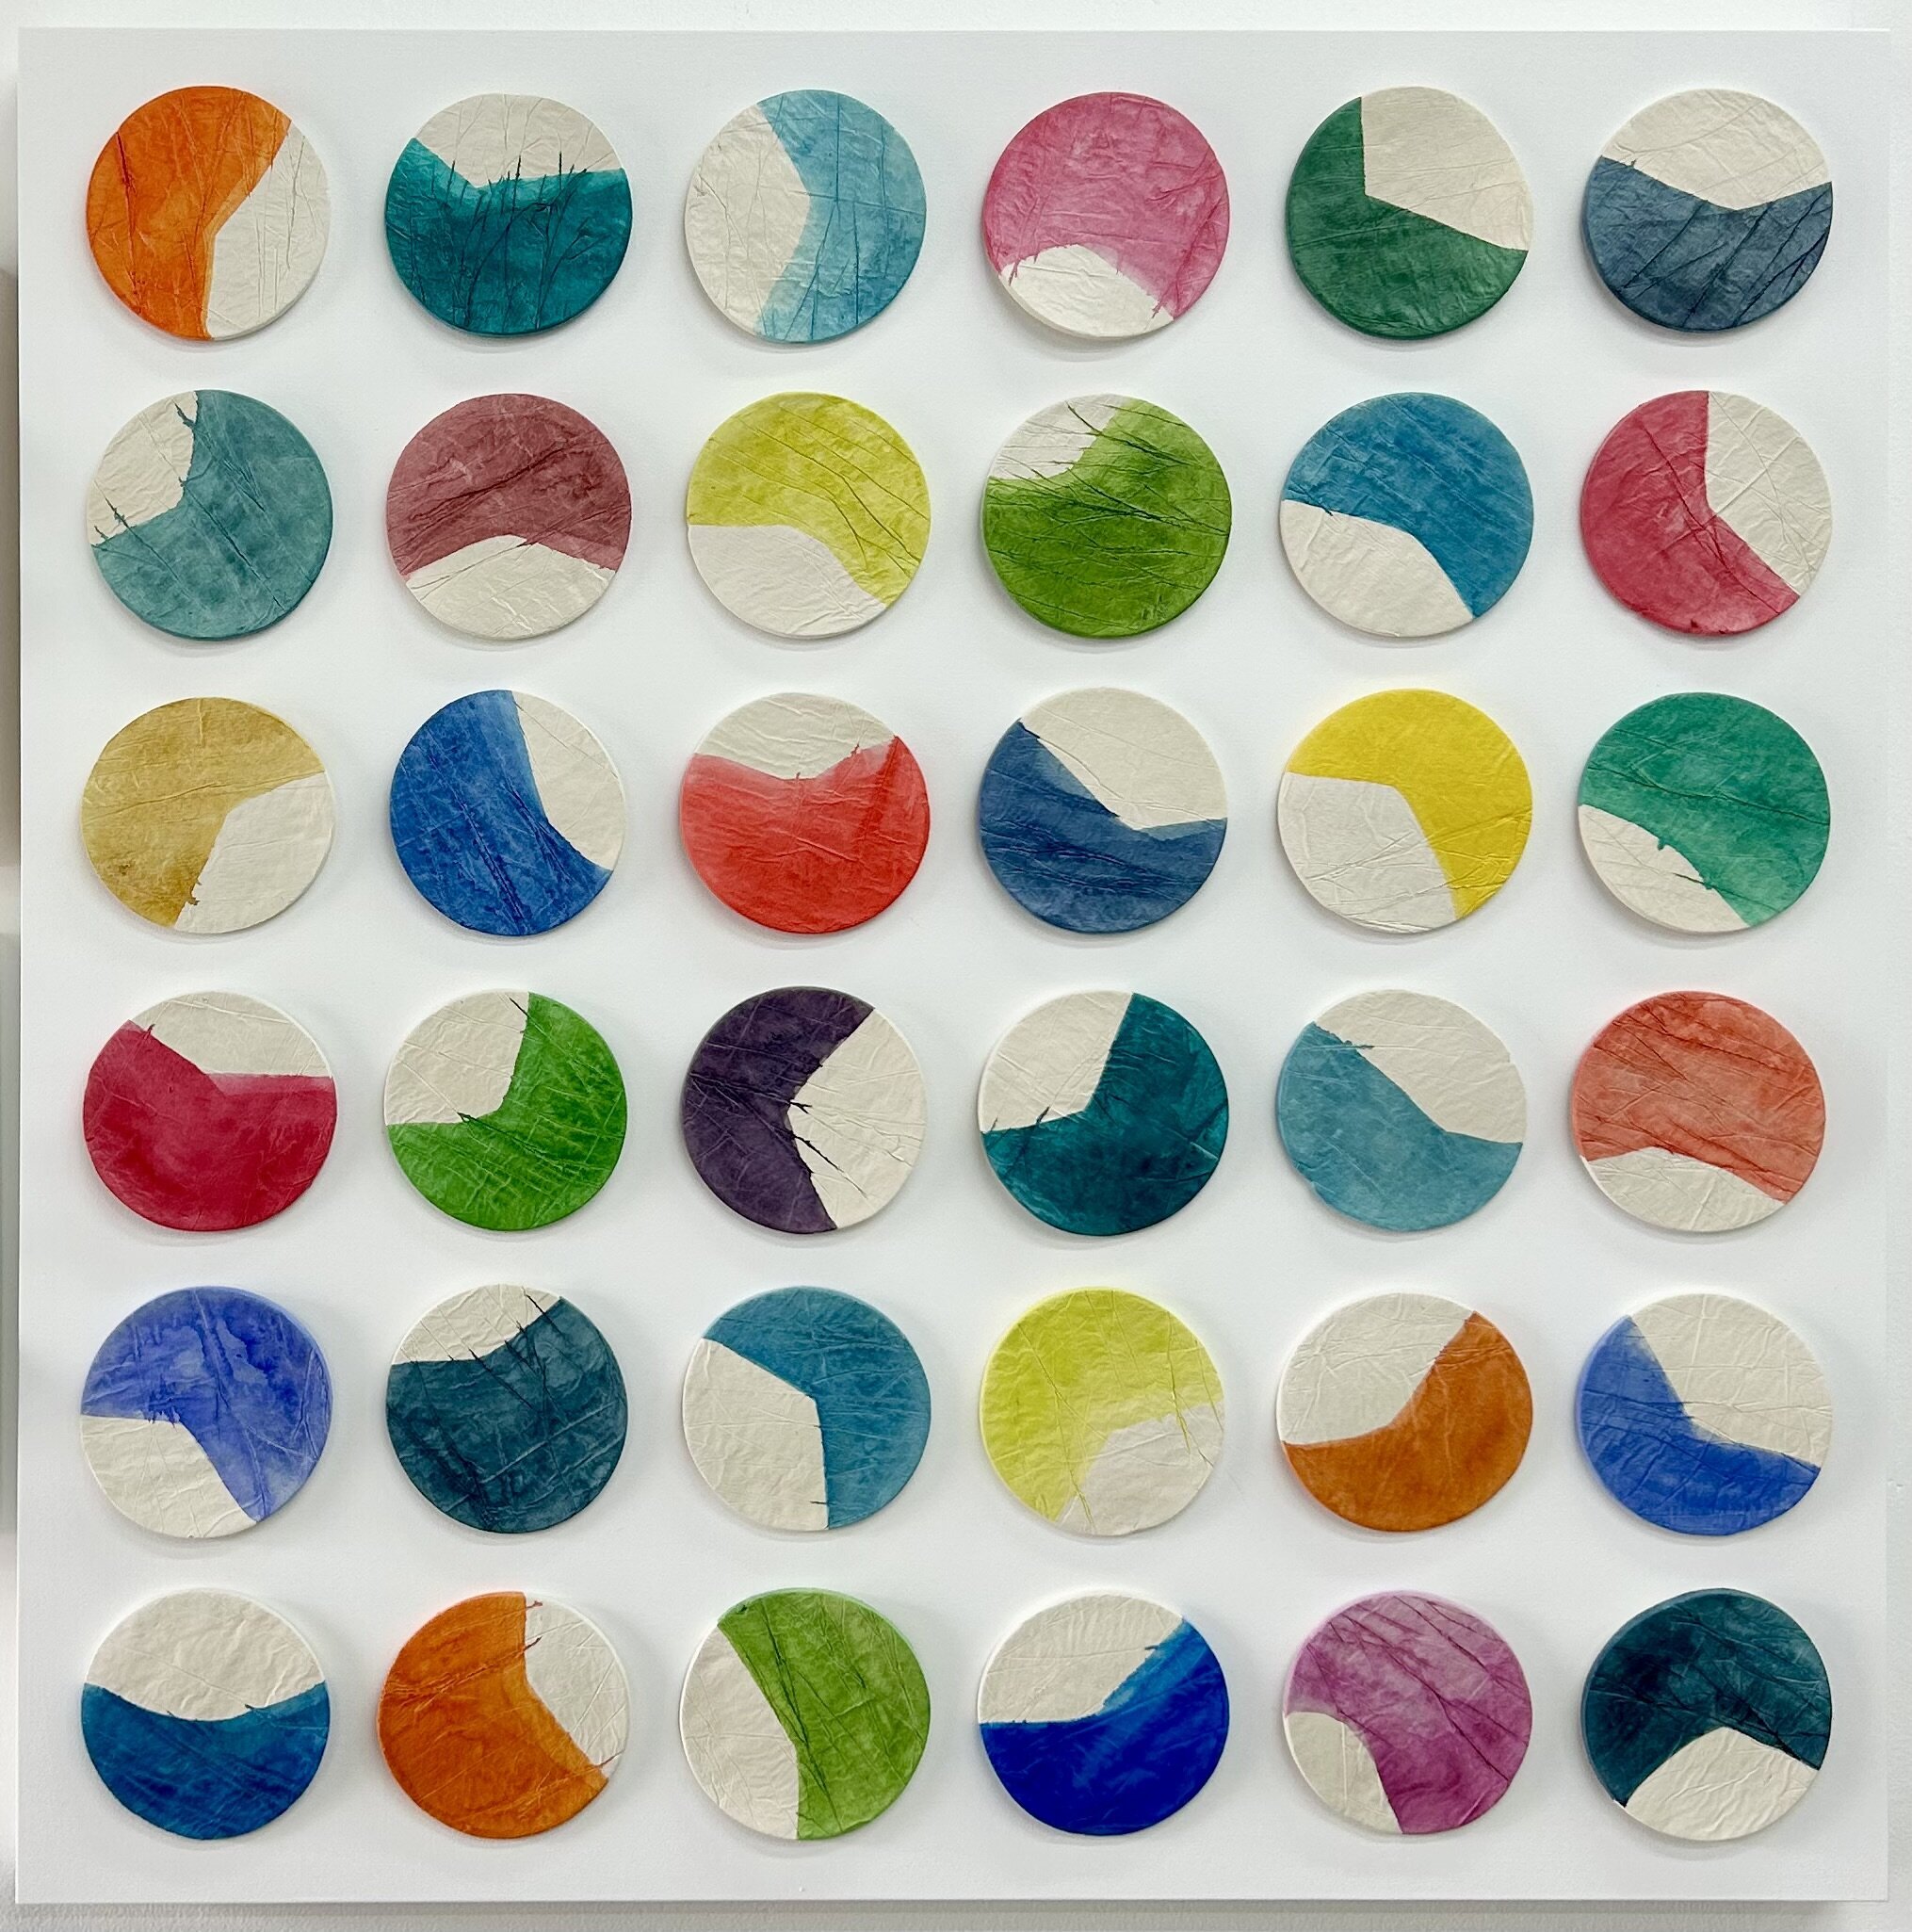 Emily Mann, Ink and Indigo, customizable dimensional wall artwork, paperclay disks with watercolor, 36x36-2